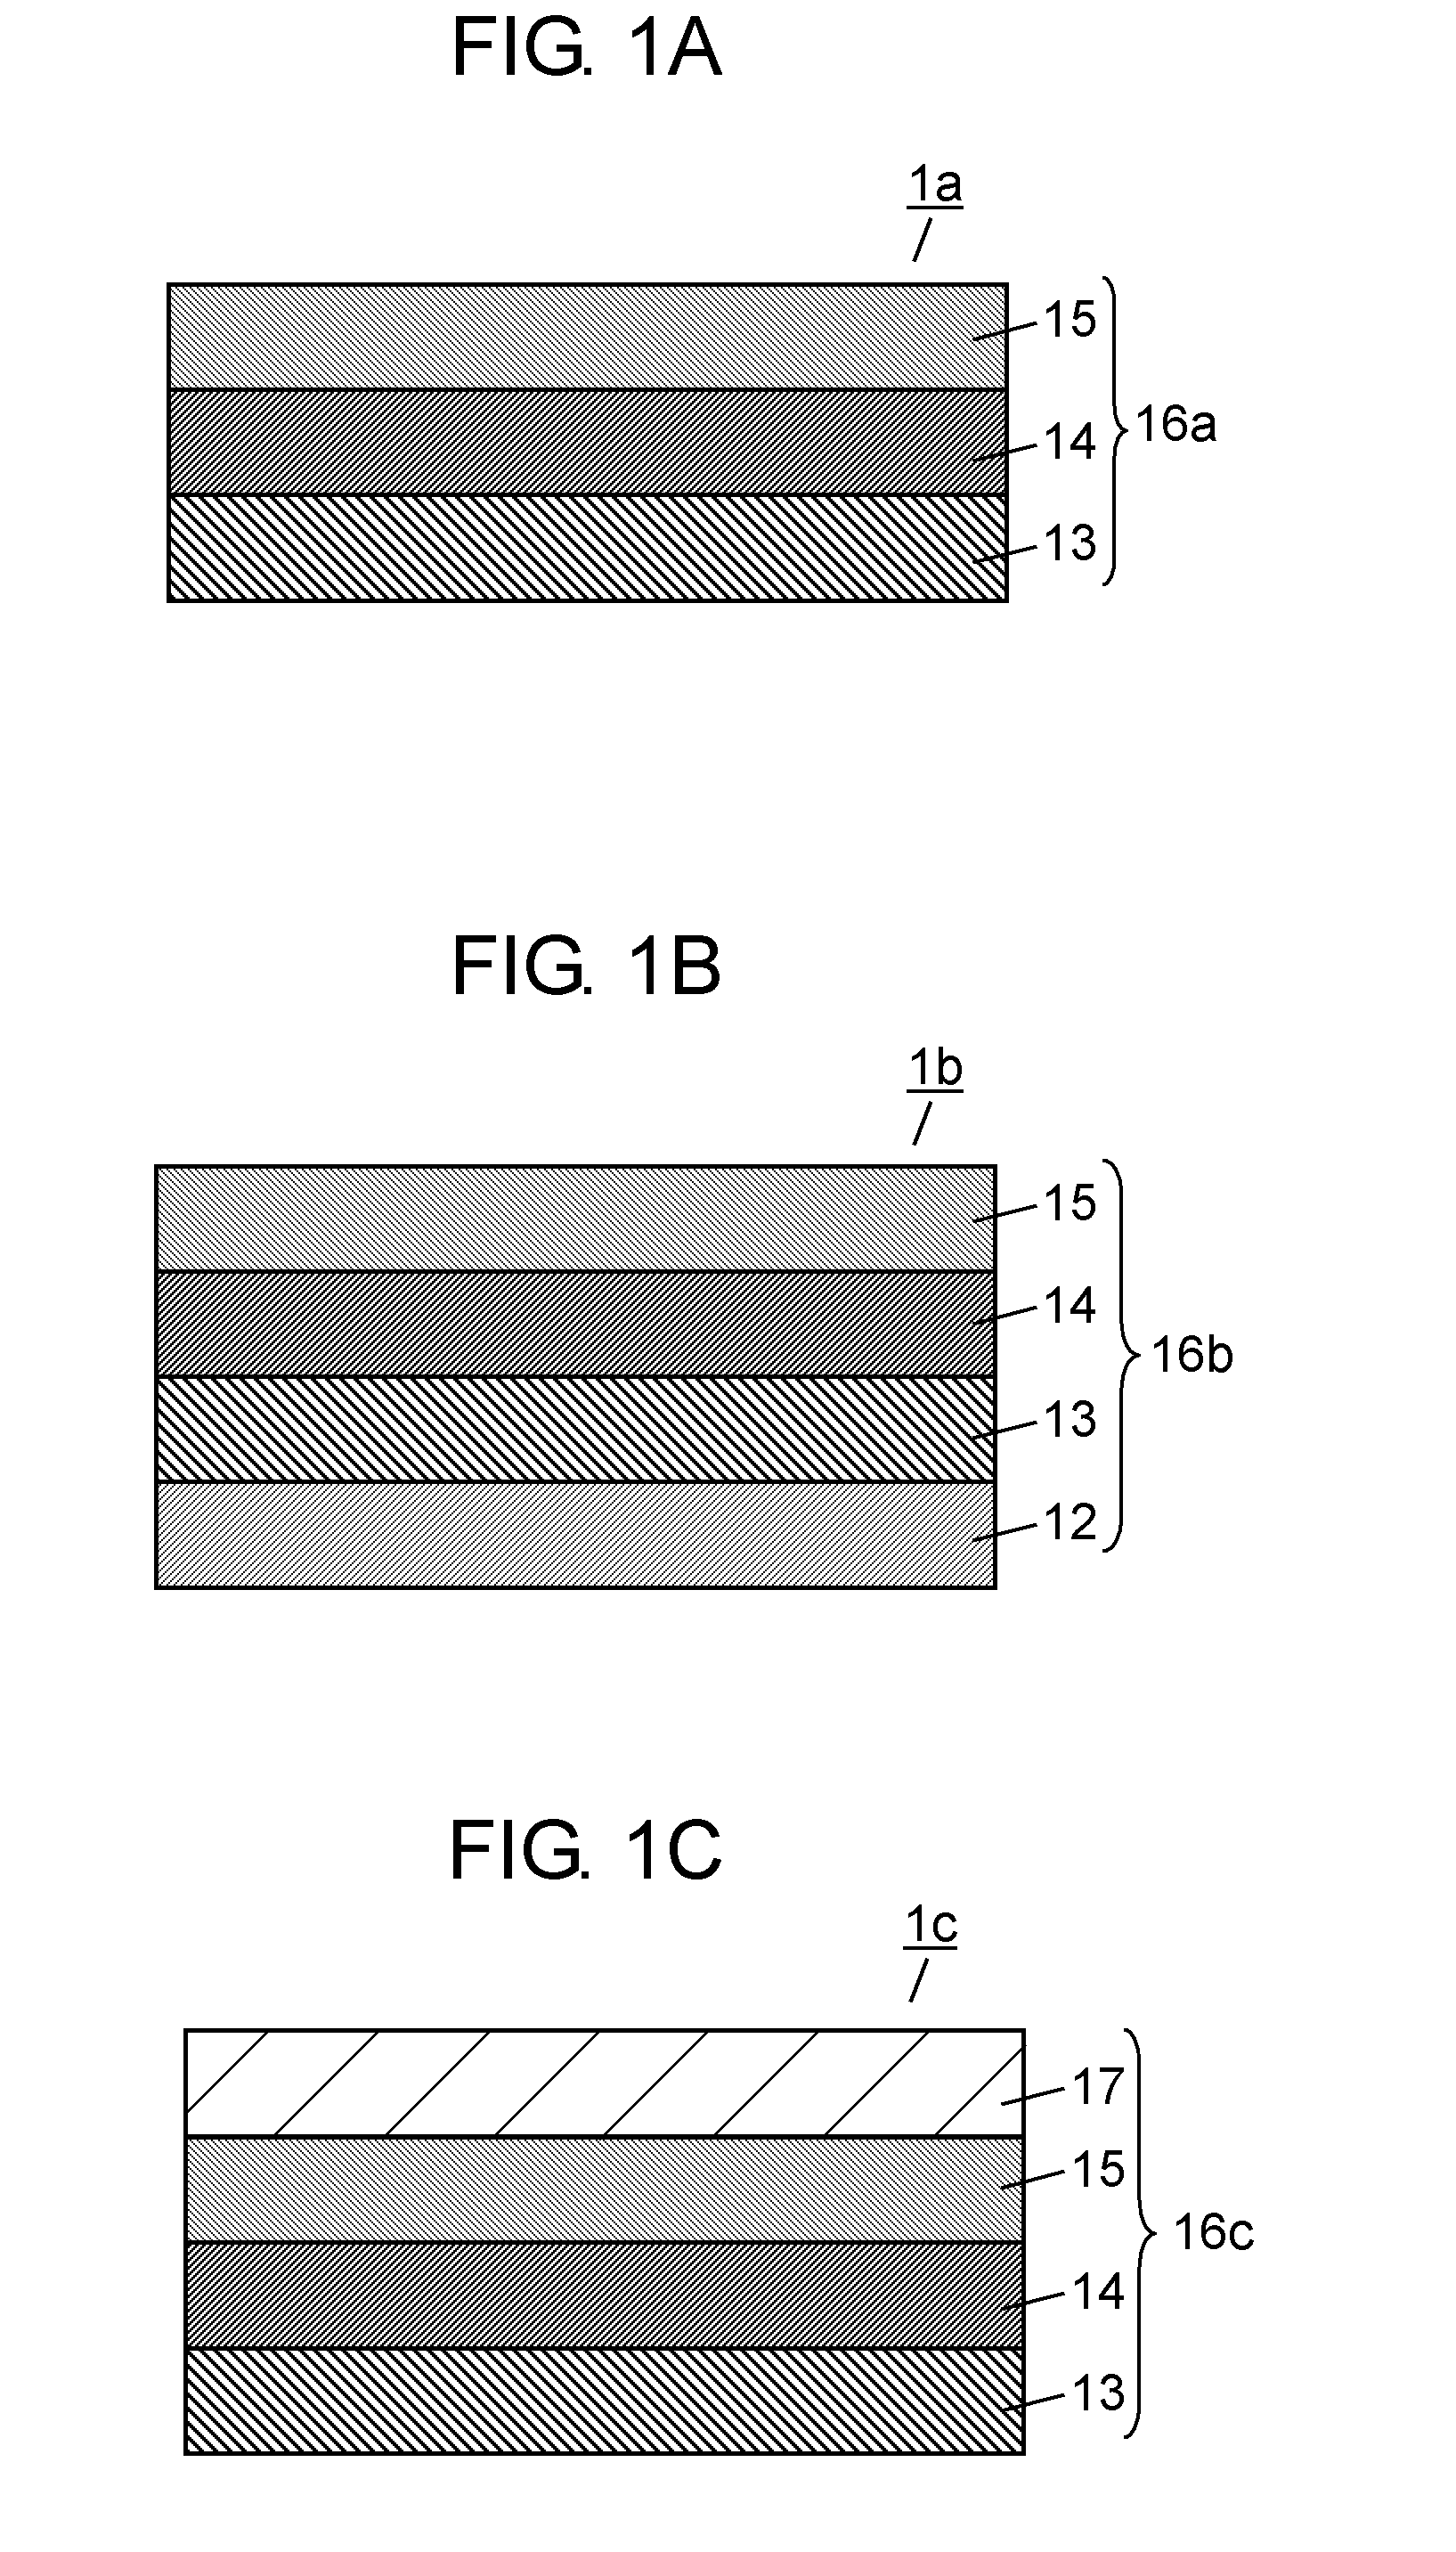 Piezoelectric thin film, ink jet head, method of forming image by the ink jet head, angular velocity sensor, method of measuring angular velocity by the angular velocity sensor, piezoelectric generating element, and method of generating electric power using the piezoelectric generating element